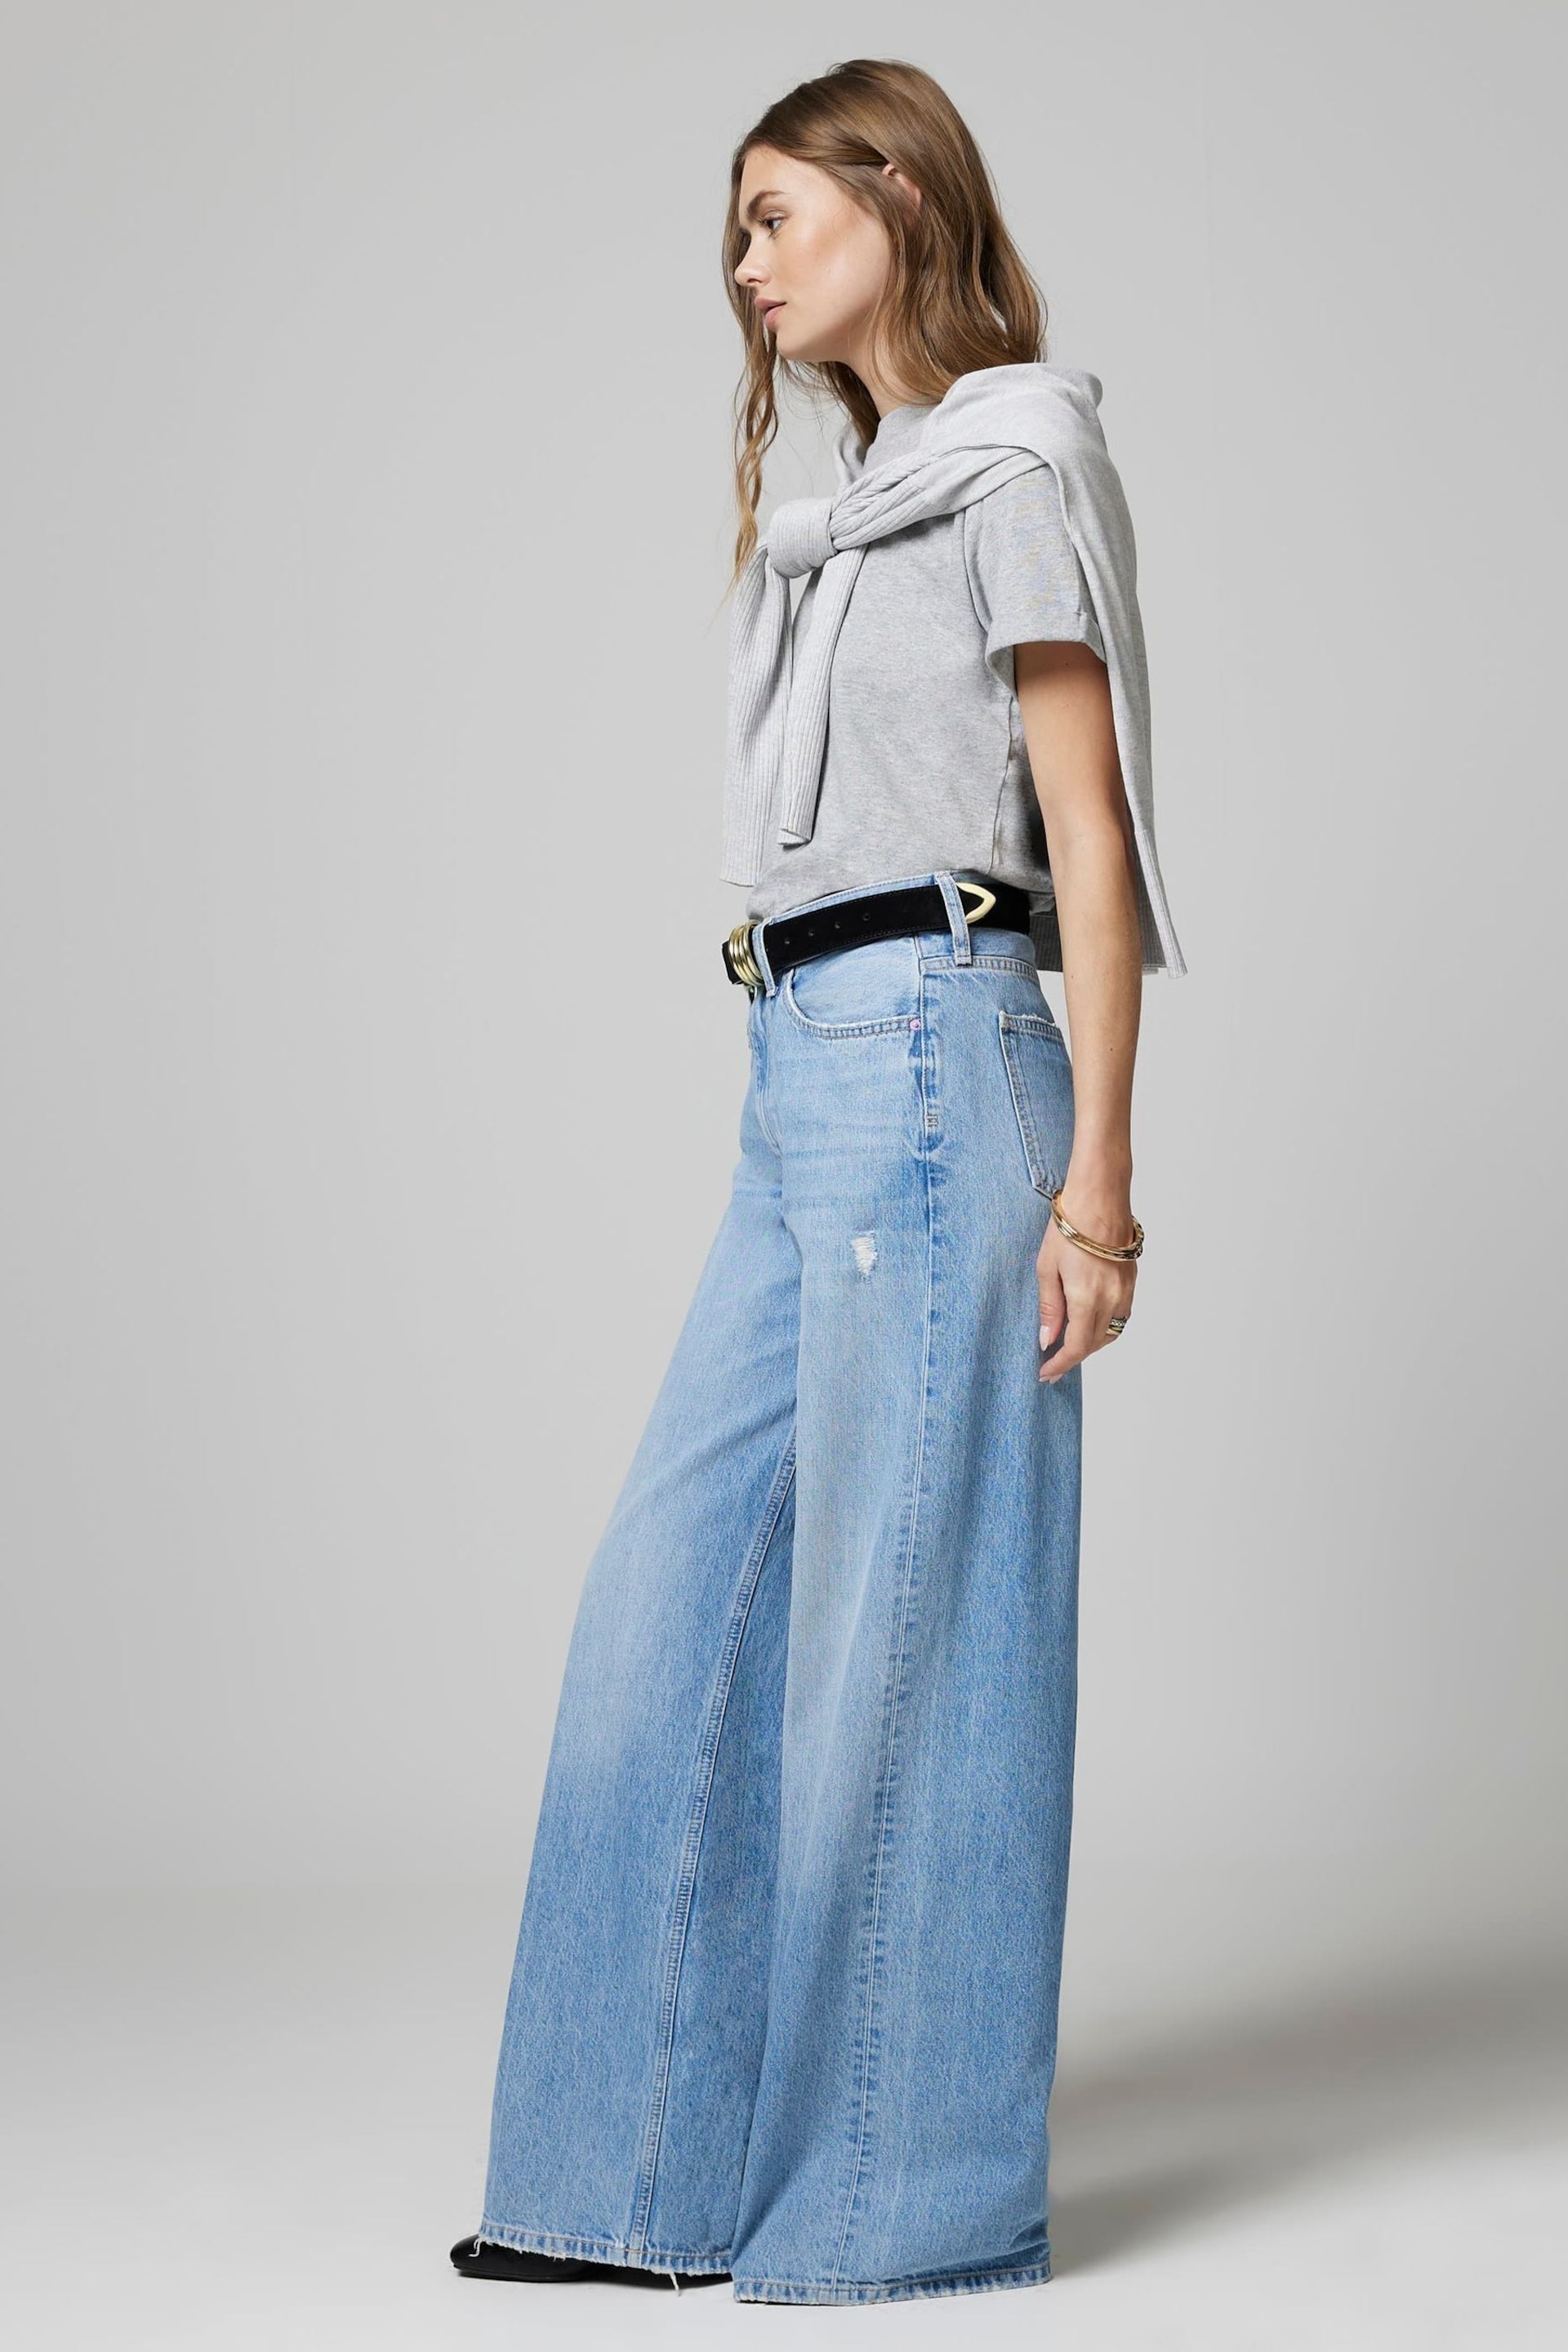 River Island Blue High Rise Wide Leg Baggy Jeans - Image 2 of 6